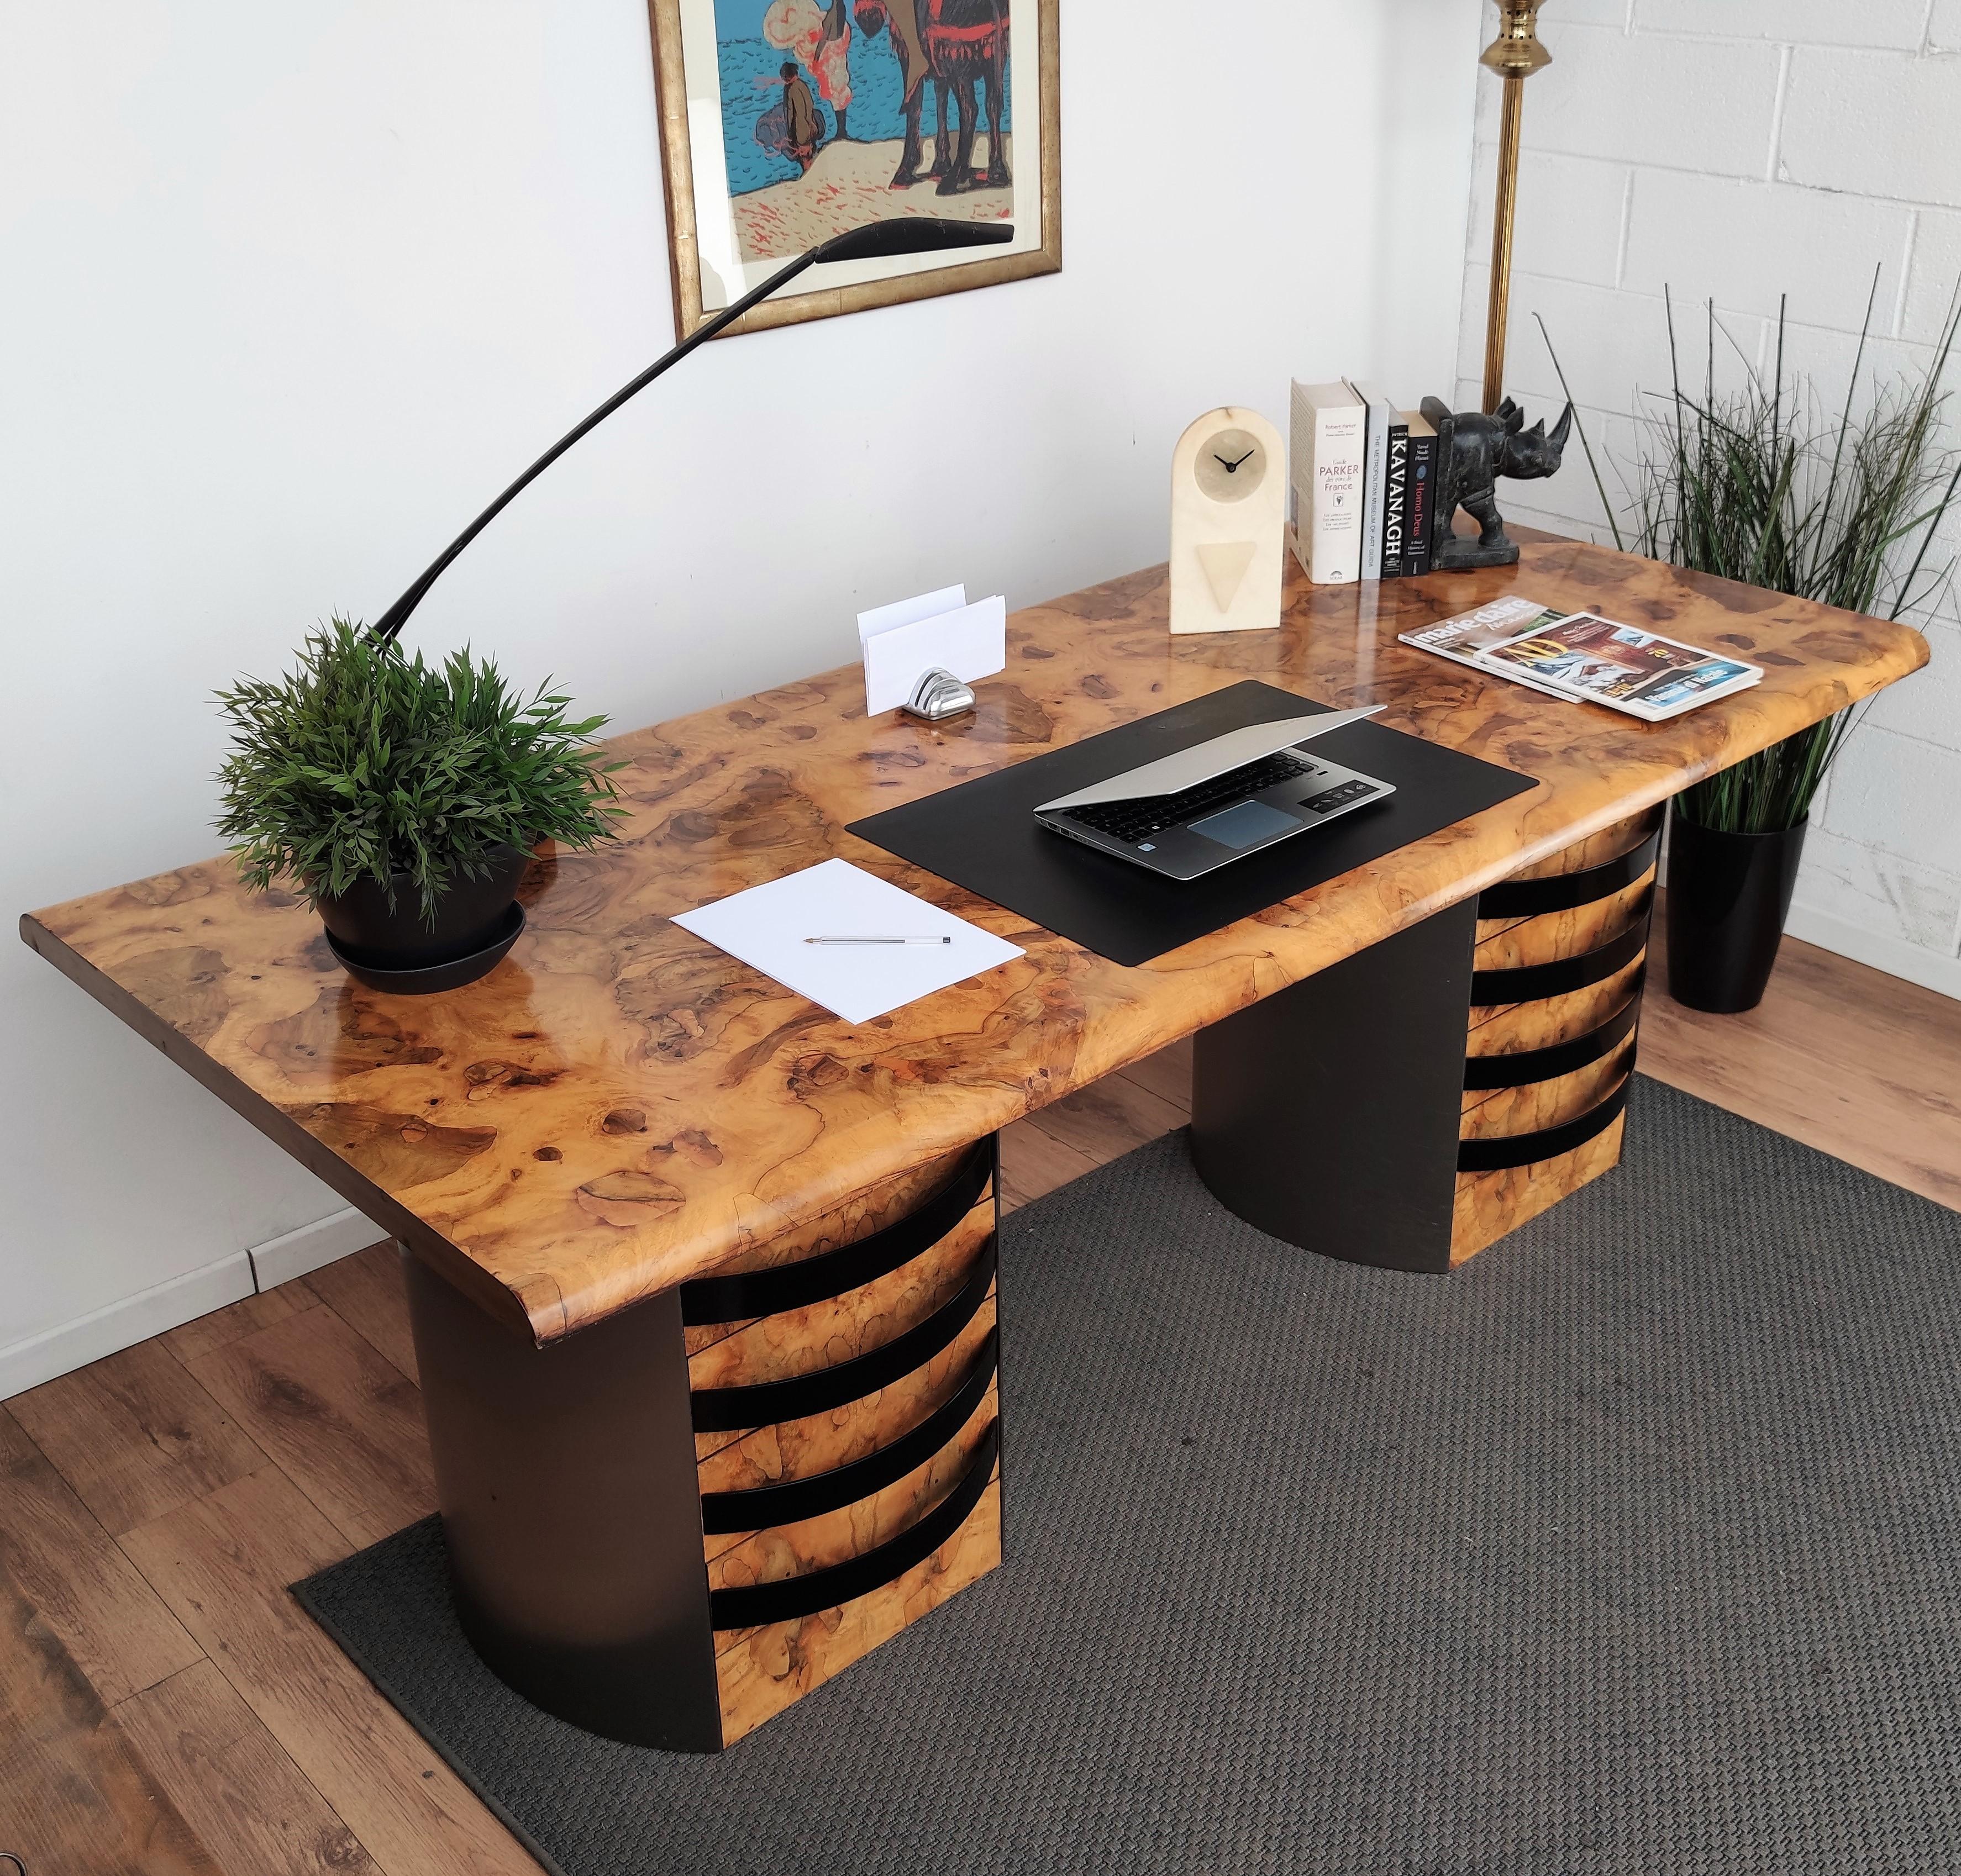 An exceptional, impressive and rarely seen Italian executive desk with its stunning veneer burl wood pattern. The huge (82.6 x 37.4 inch) and beautiful top of the desk is standing on 2 circular steel stands, offering a total of eight drawers, four